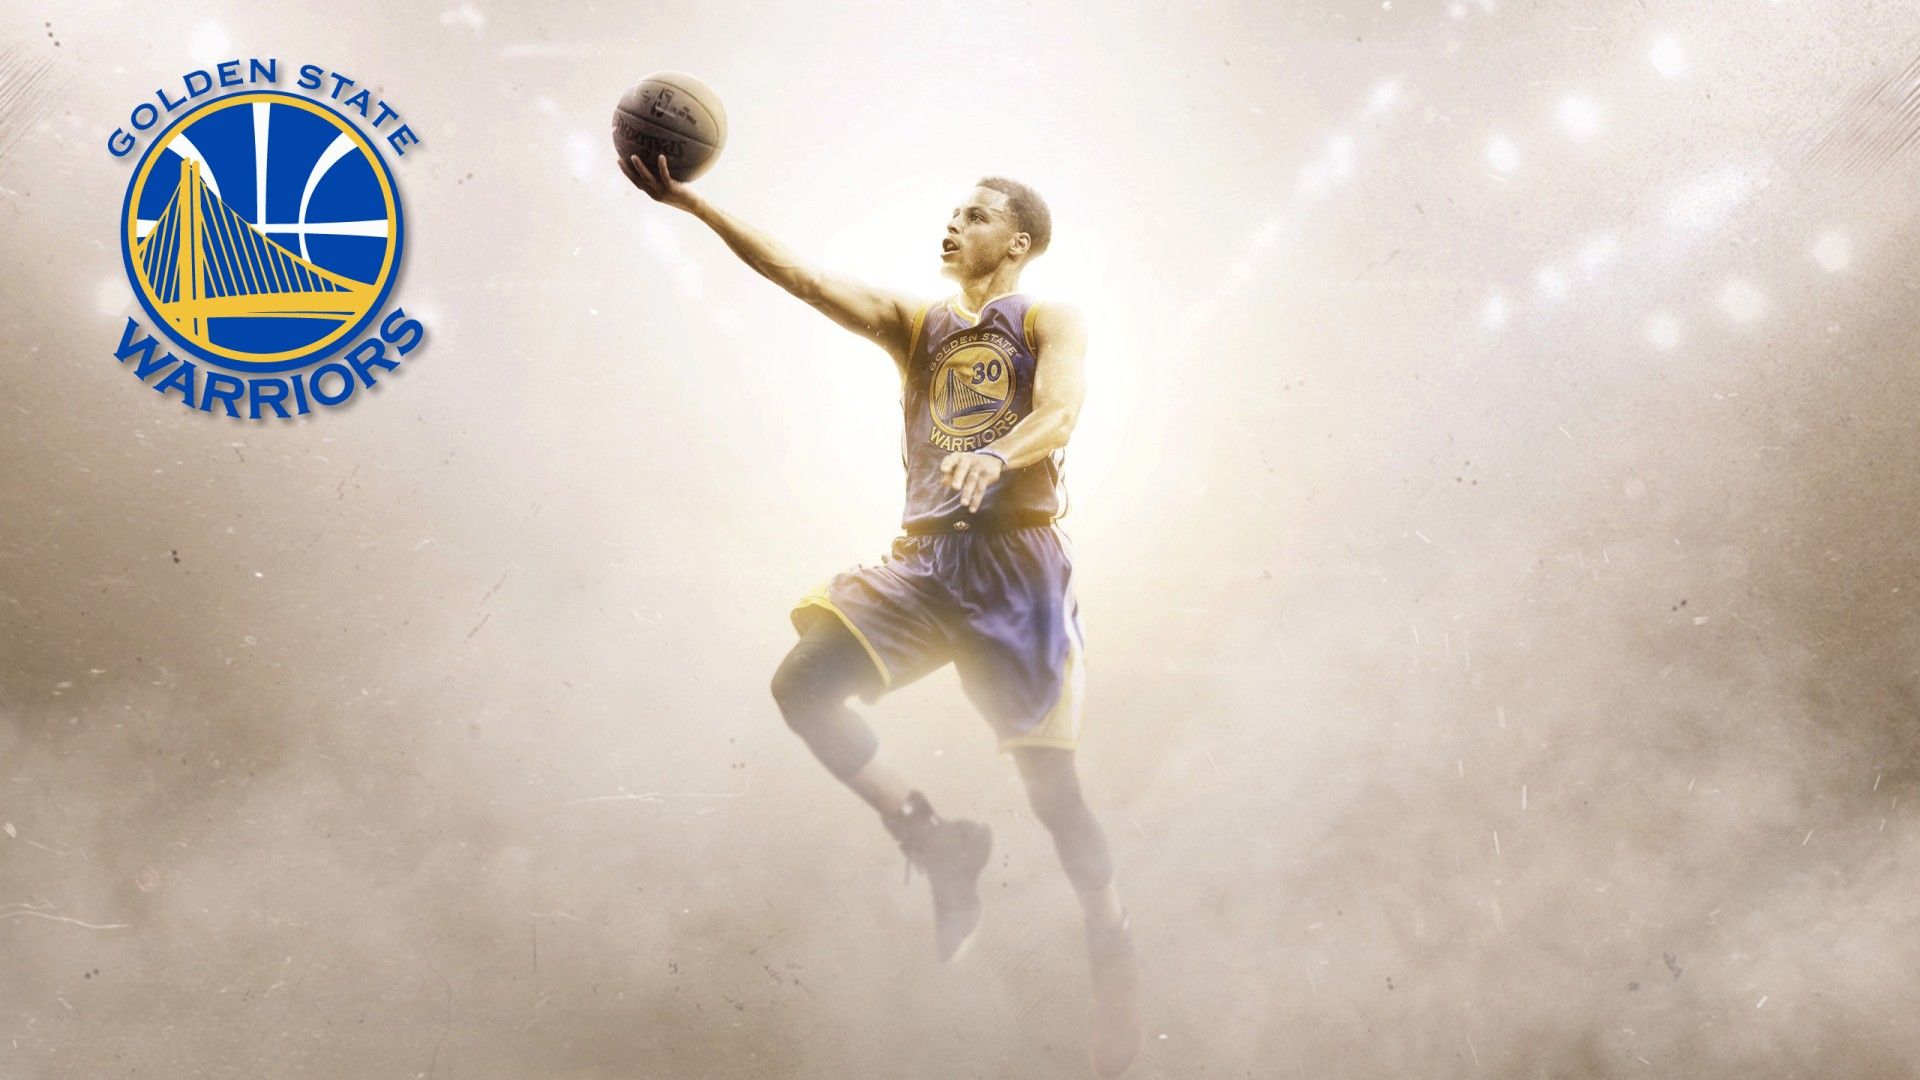 Stephen Curry 2022 Wallpapers - Wallpaper Cave